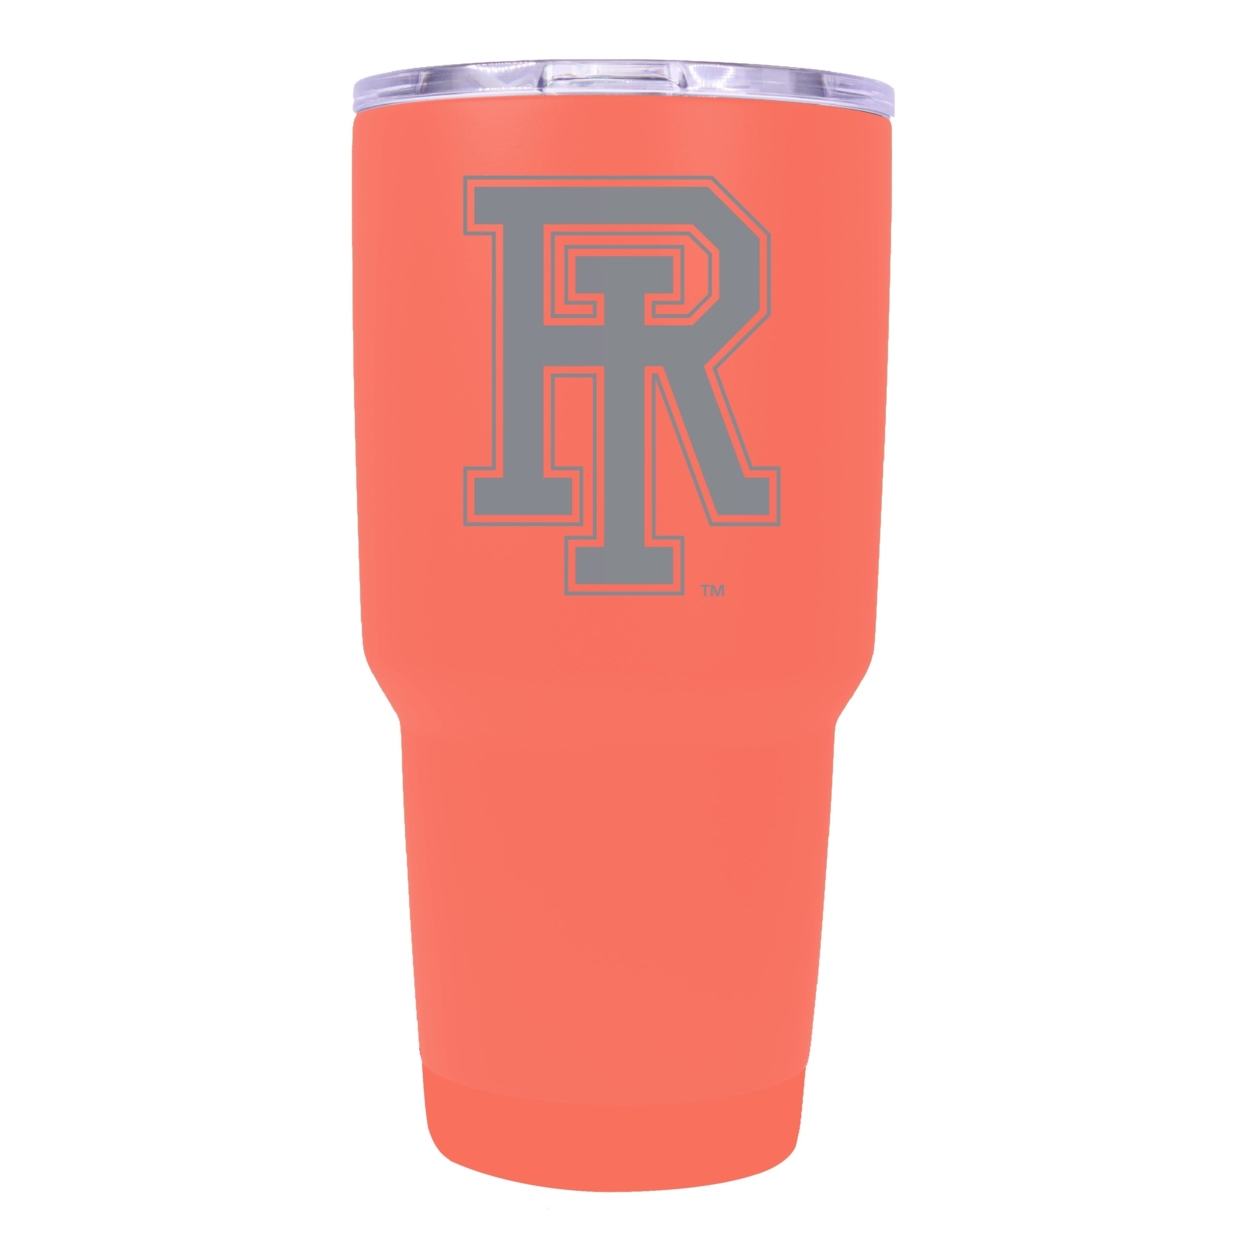 Rhode Island University 24 Oz Laser Engraved Stainless Steel Insulated Tumbler - Choose Your Color. - Coral